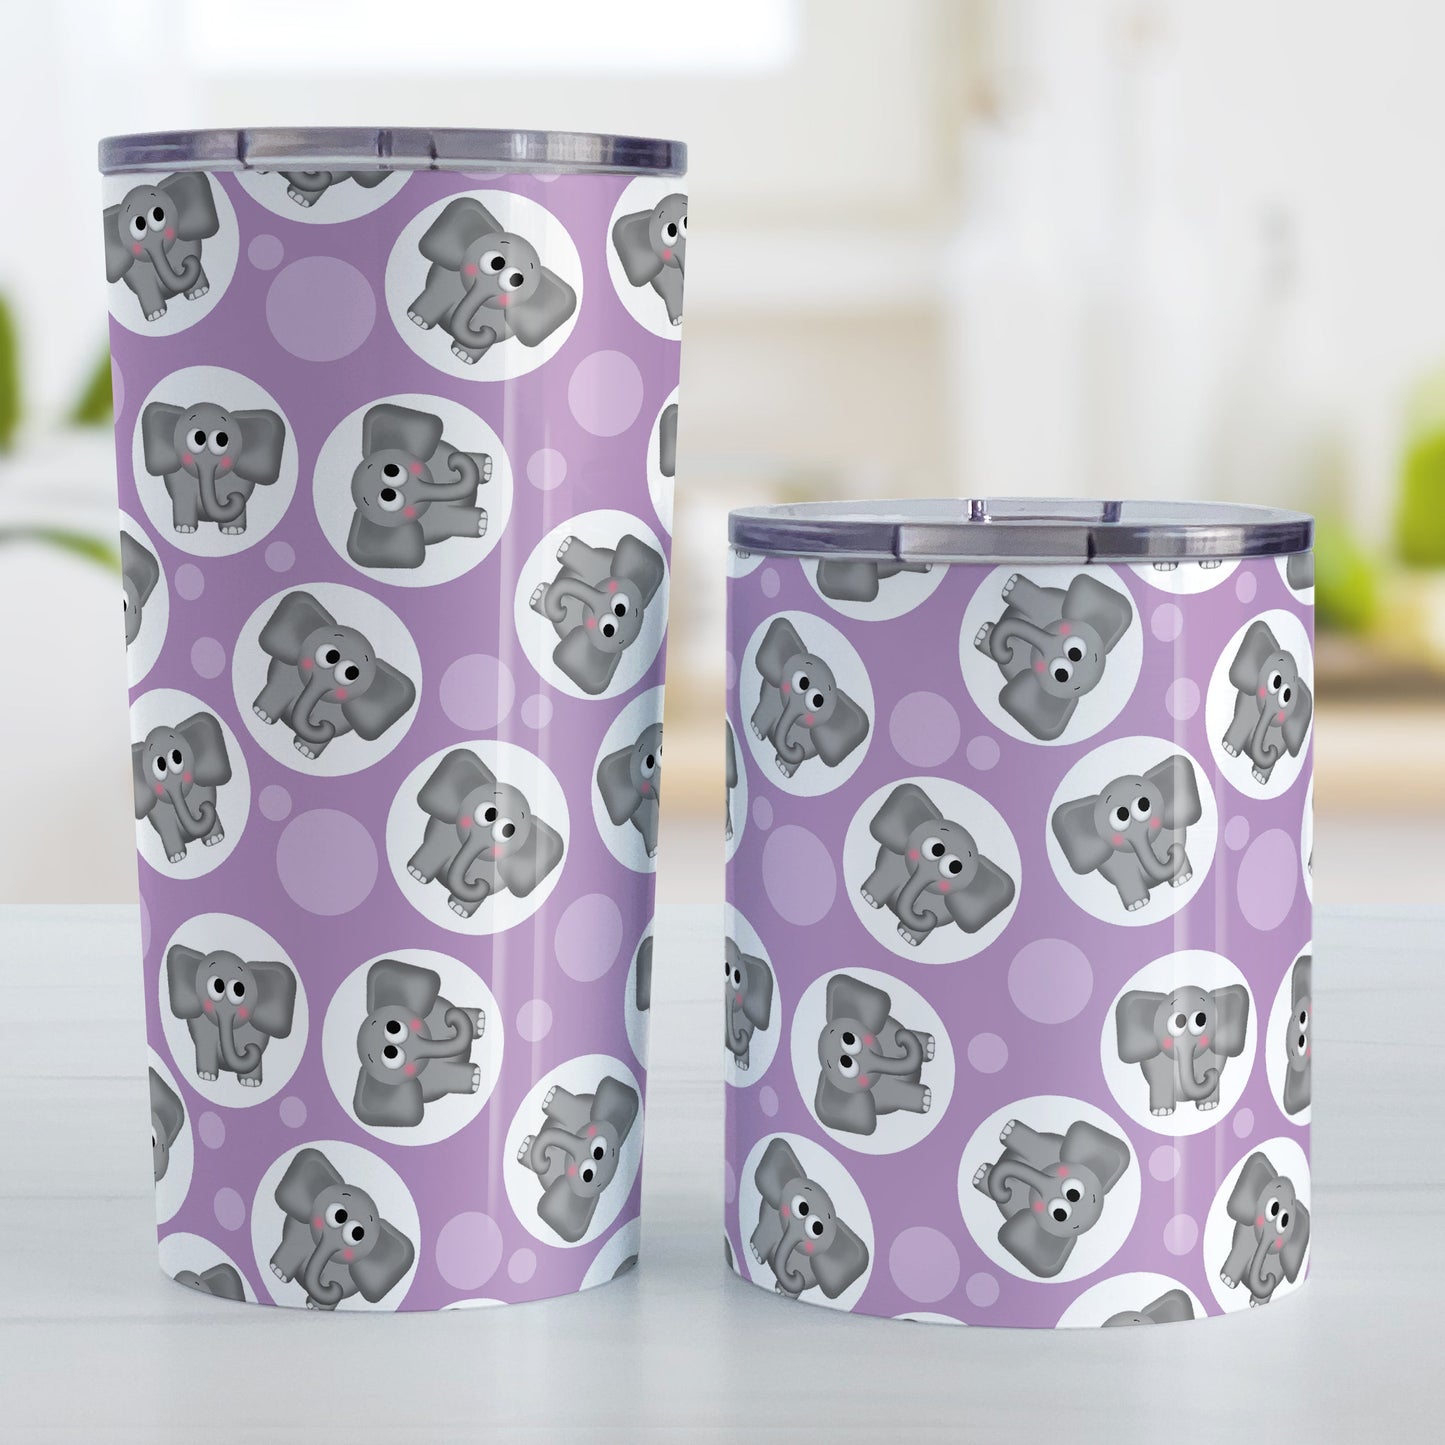 Cute Purple Elephant Pattern Tumbler Cup (20oz and 10oz, stainless steel insulated) at Amy's Coffee Mugs